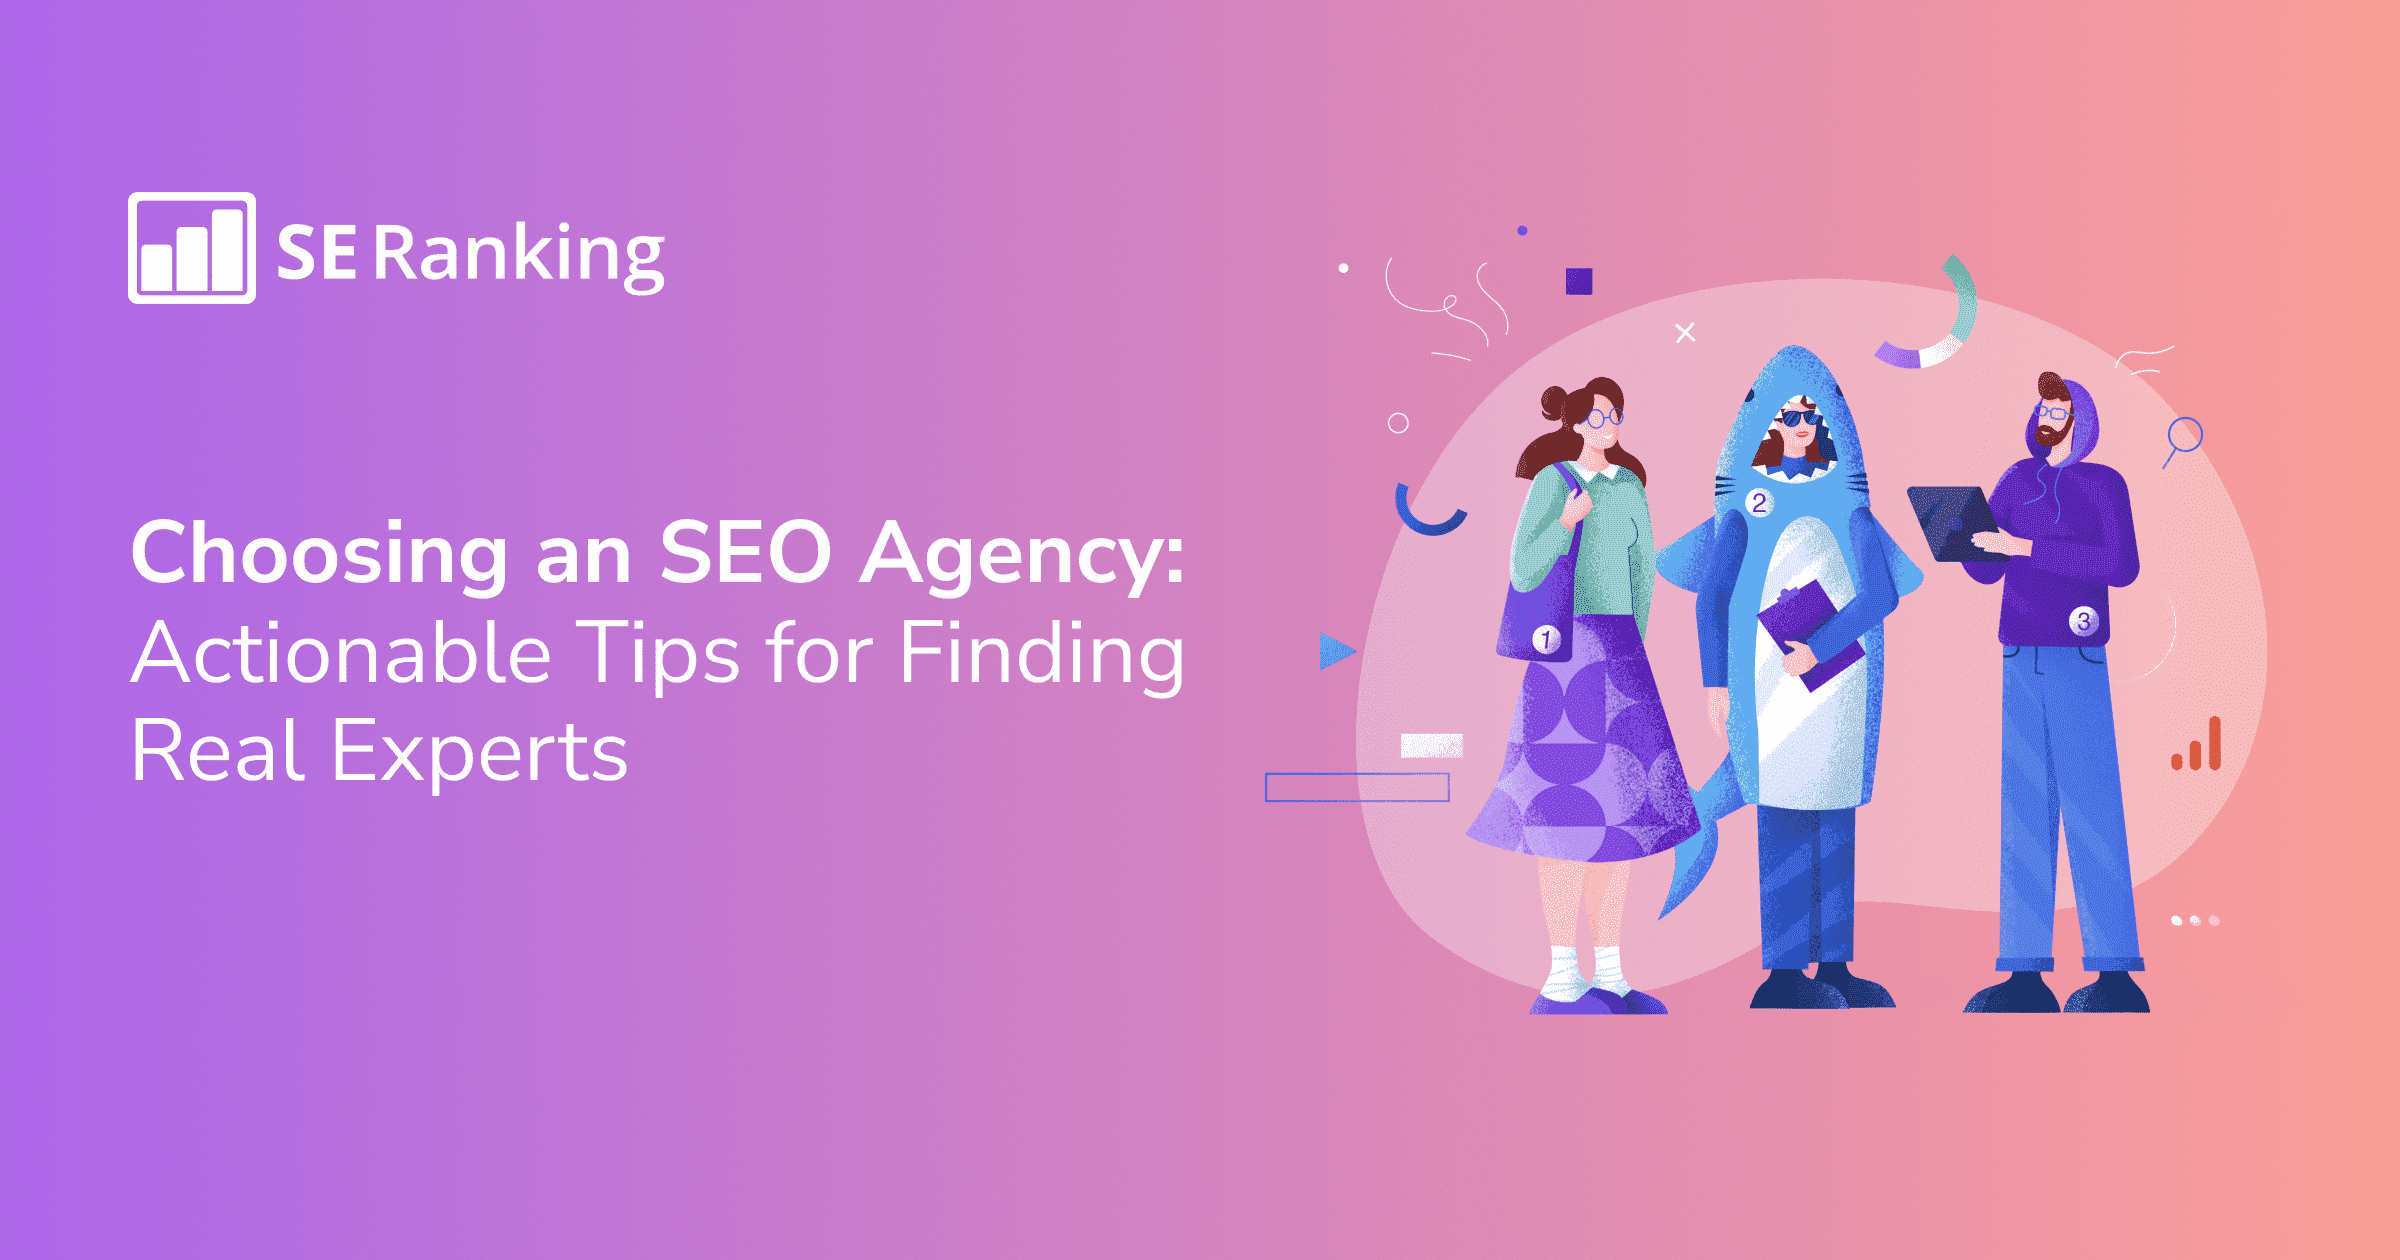 Wondering How to Find the Right Team to Help You With Your SEO Efforts?